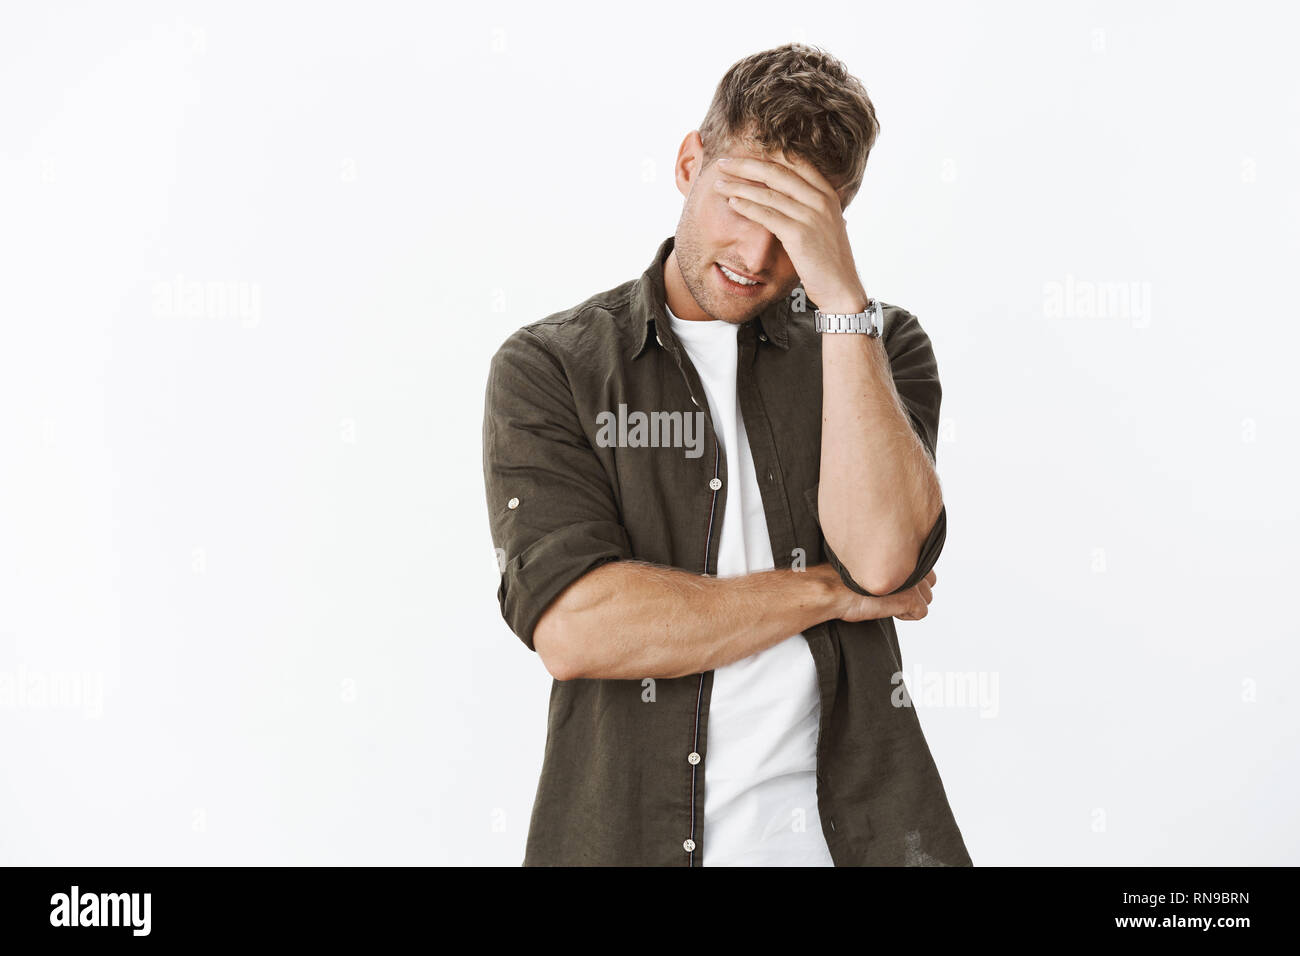 Embarrassed and awkward handsome ex-boyfriend trying hide behind hand as making facepalm gesture so girl would not recognize him, smiling from stress Stock Photo